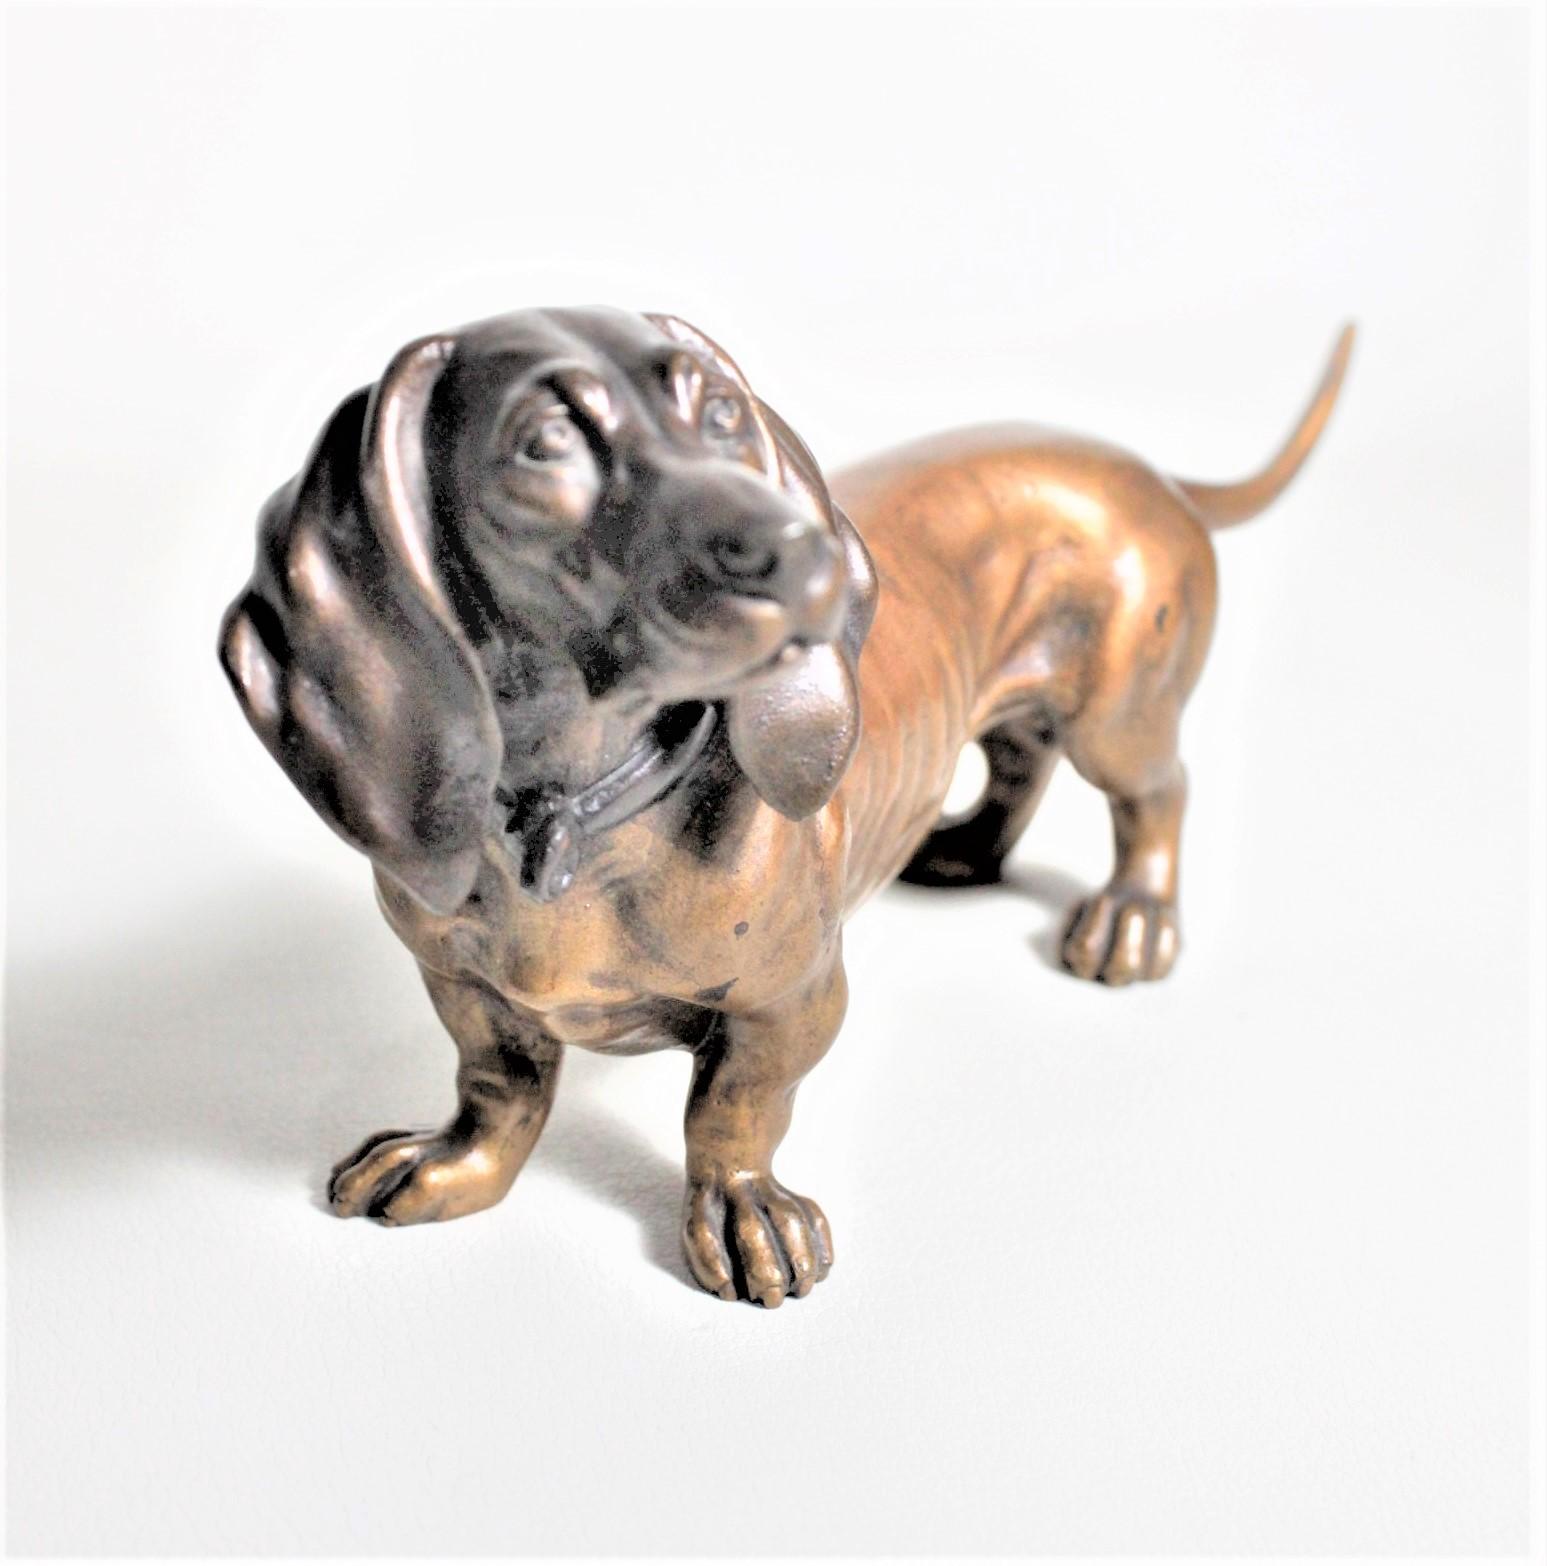 Large Antique Austrian Cold-Painted Bronze Basset Hound Dog Figurine In Good Condition For Sale In Hamilton, Ontario